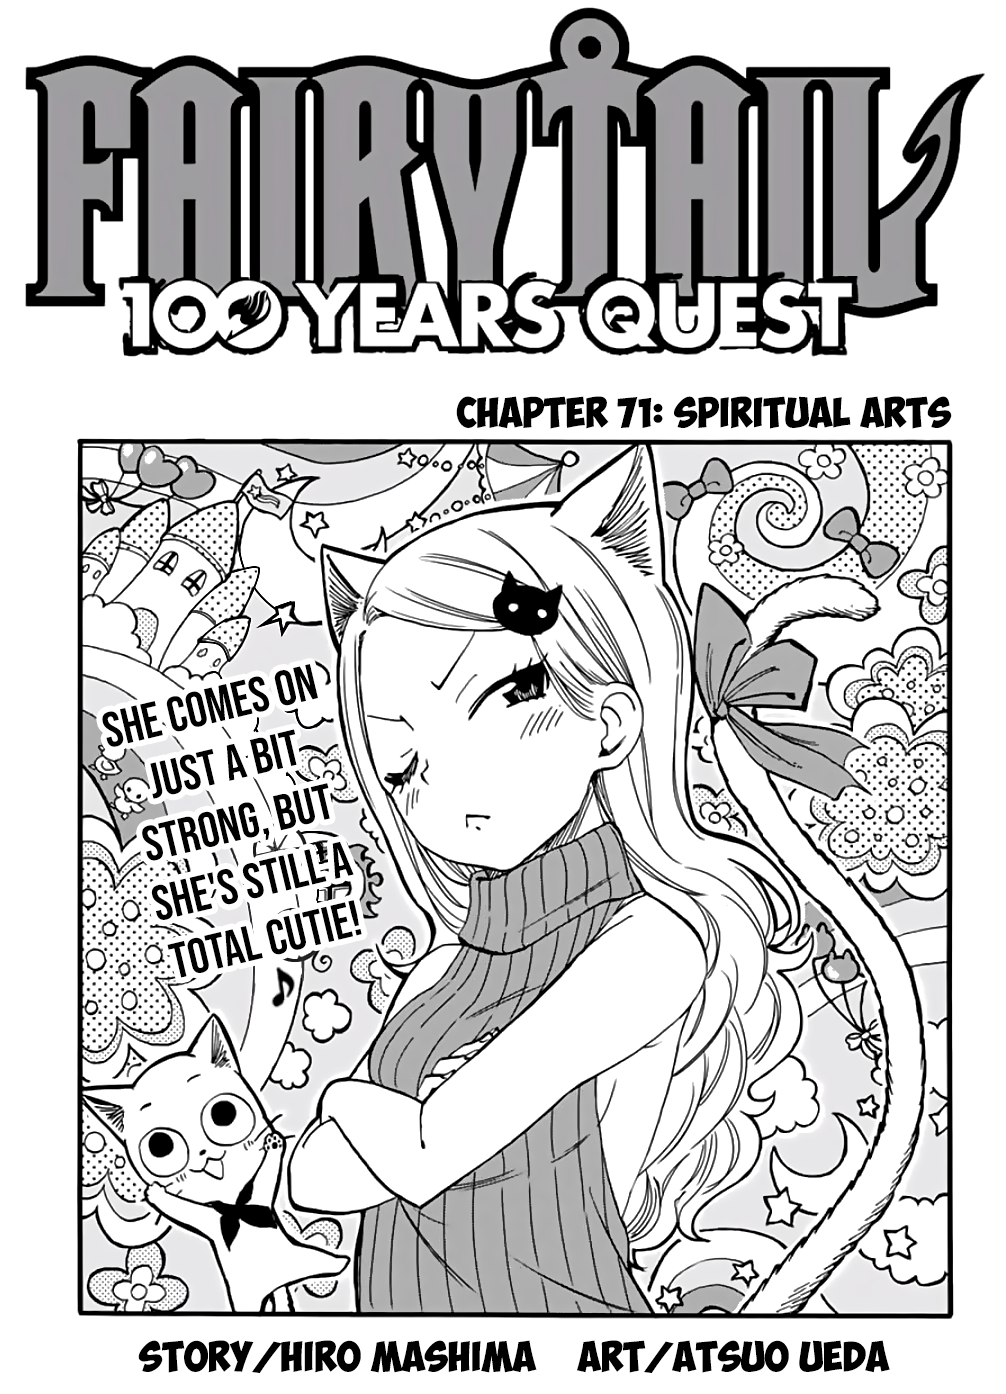 Fairy Tail 100 Years Quest' Continues